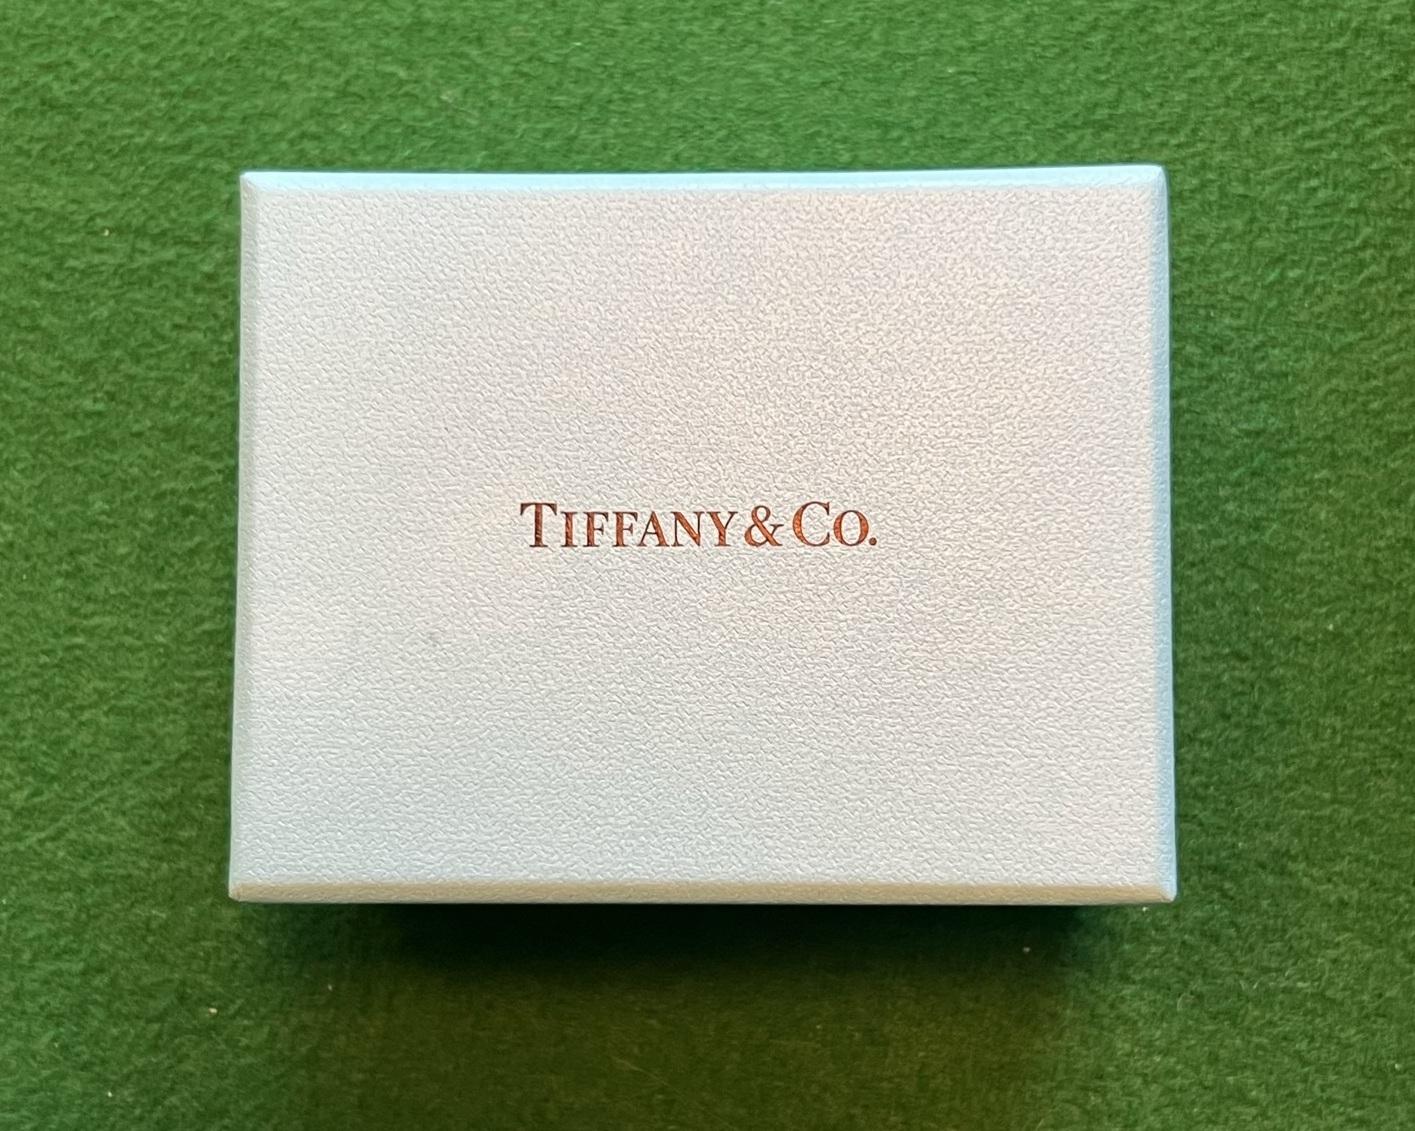 Rrp £11, 500 Tiffany & Co Platinum 1.06 Ct Diamond Solitaire Stud Earrings Pair For Sale 6